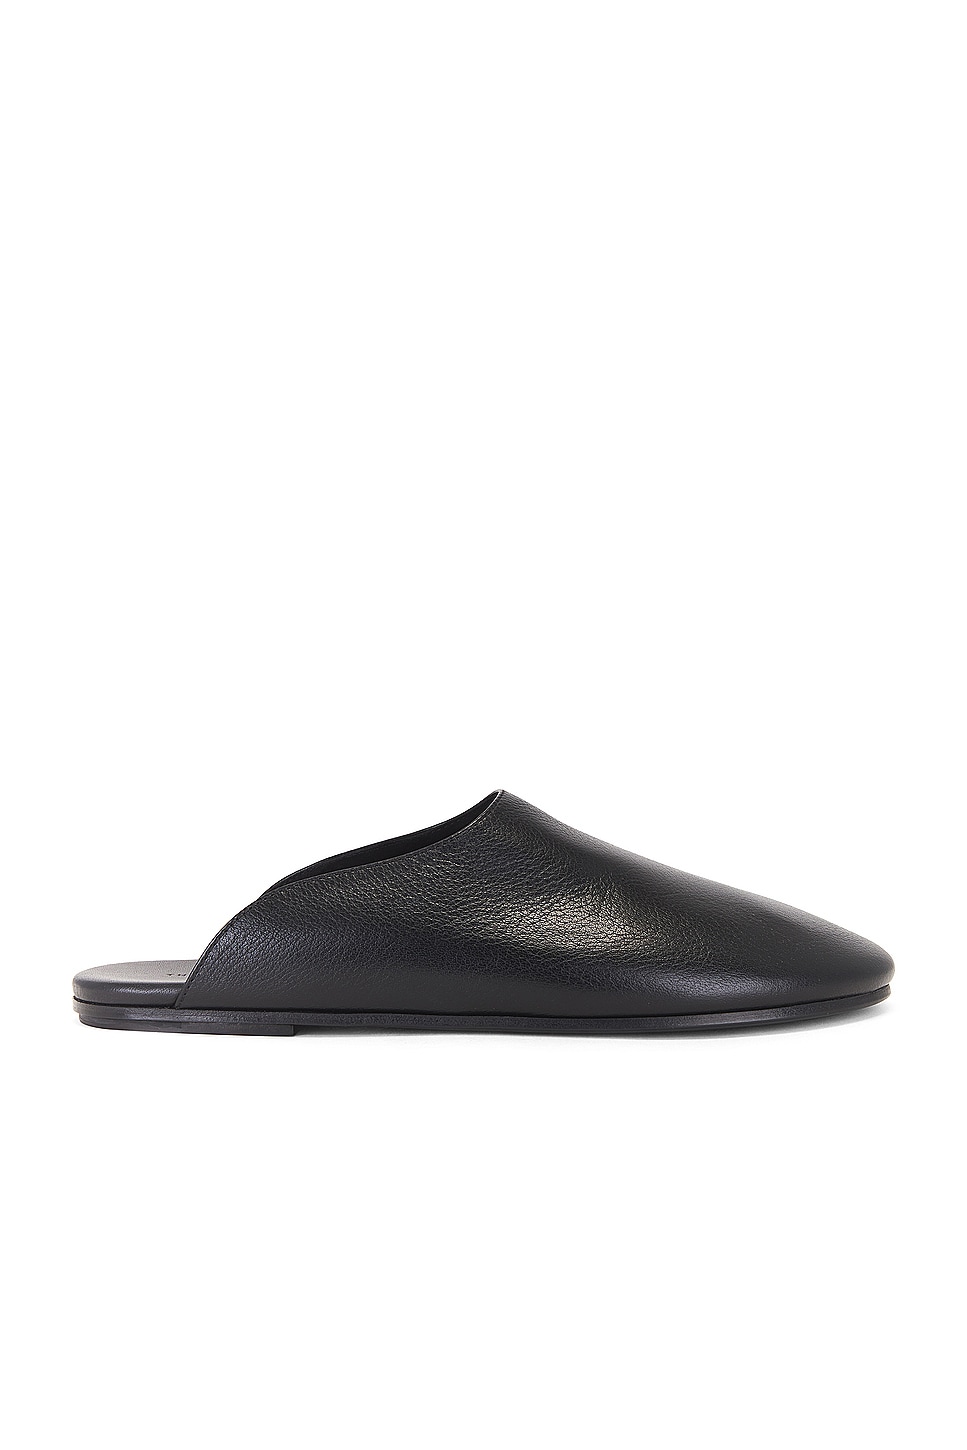 Image 1 of The Row Nicco Slide in Black